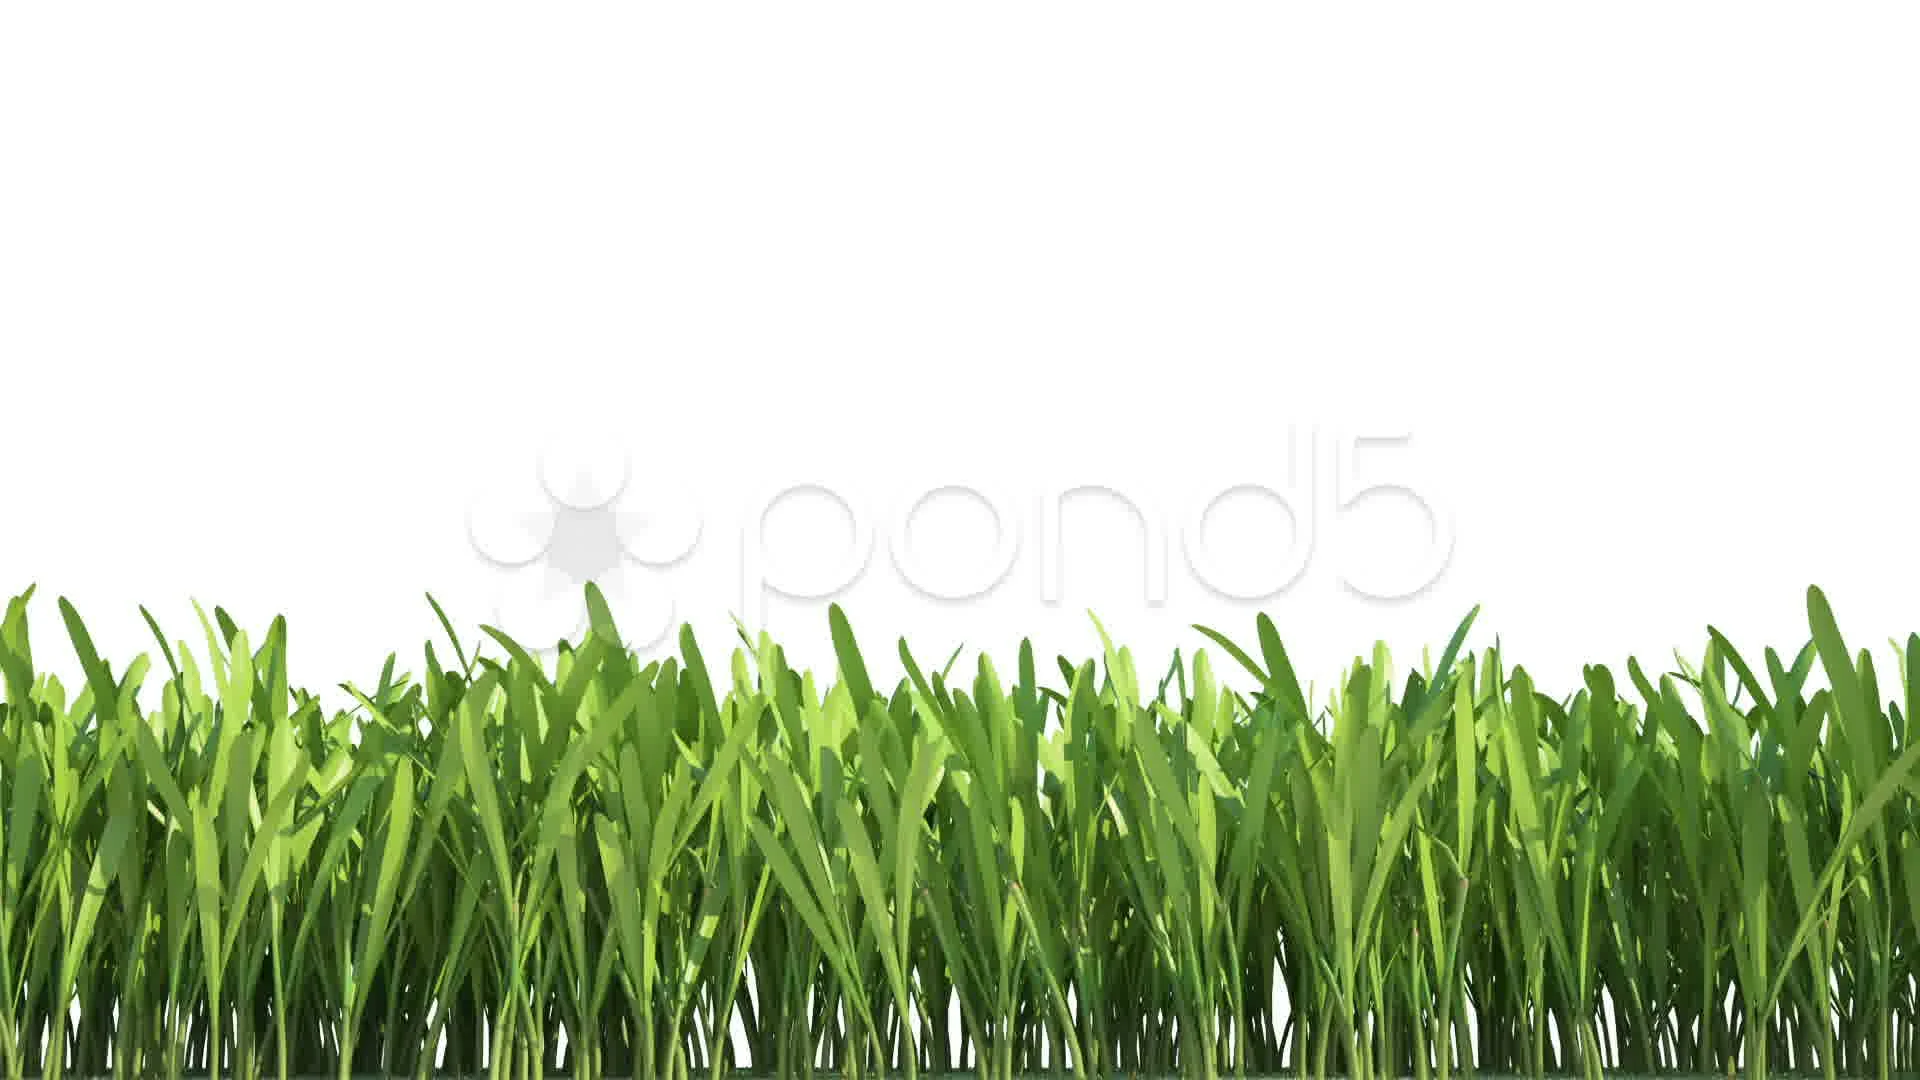 A time-lapse animation of growing grass | Stock Video | Pond5